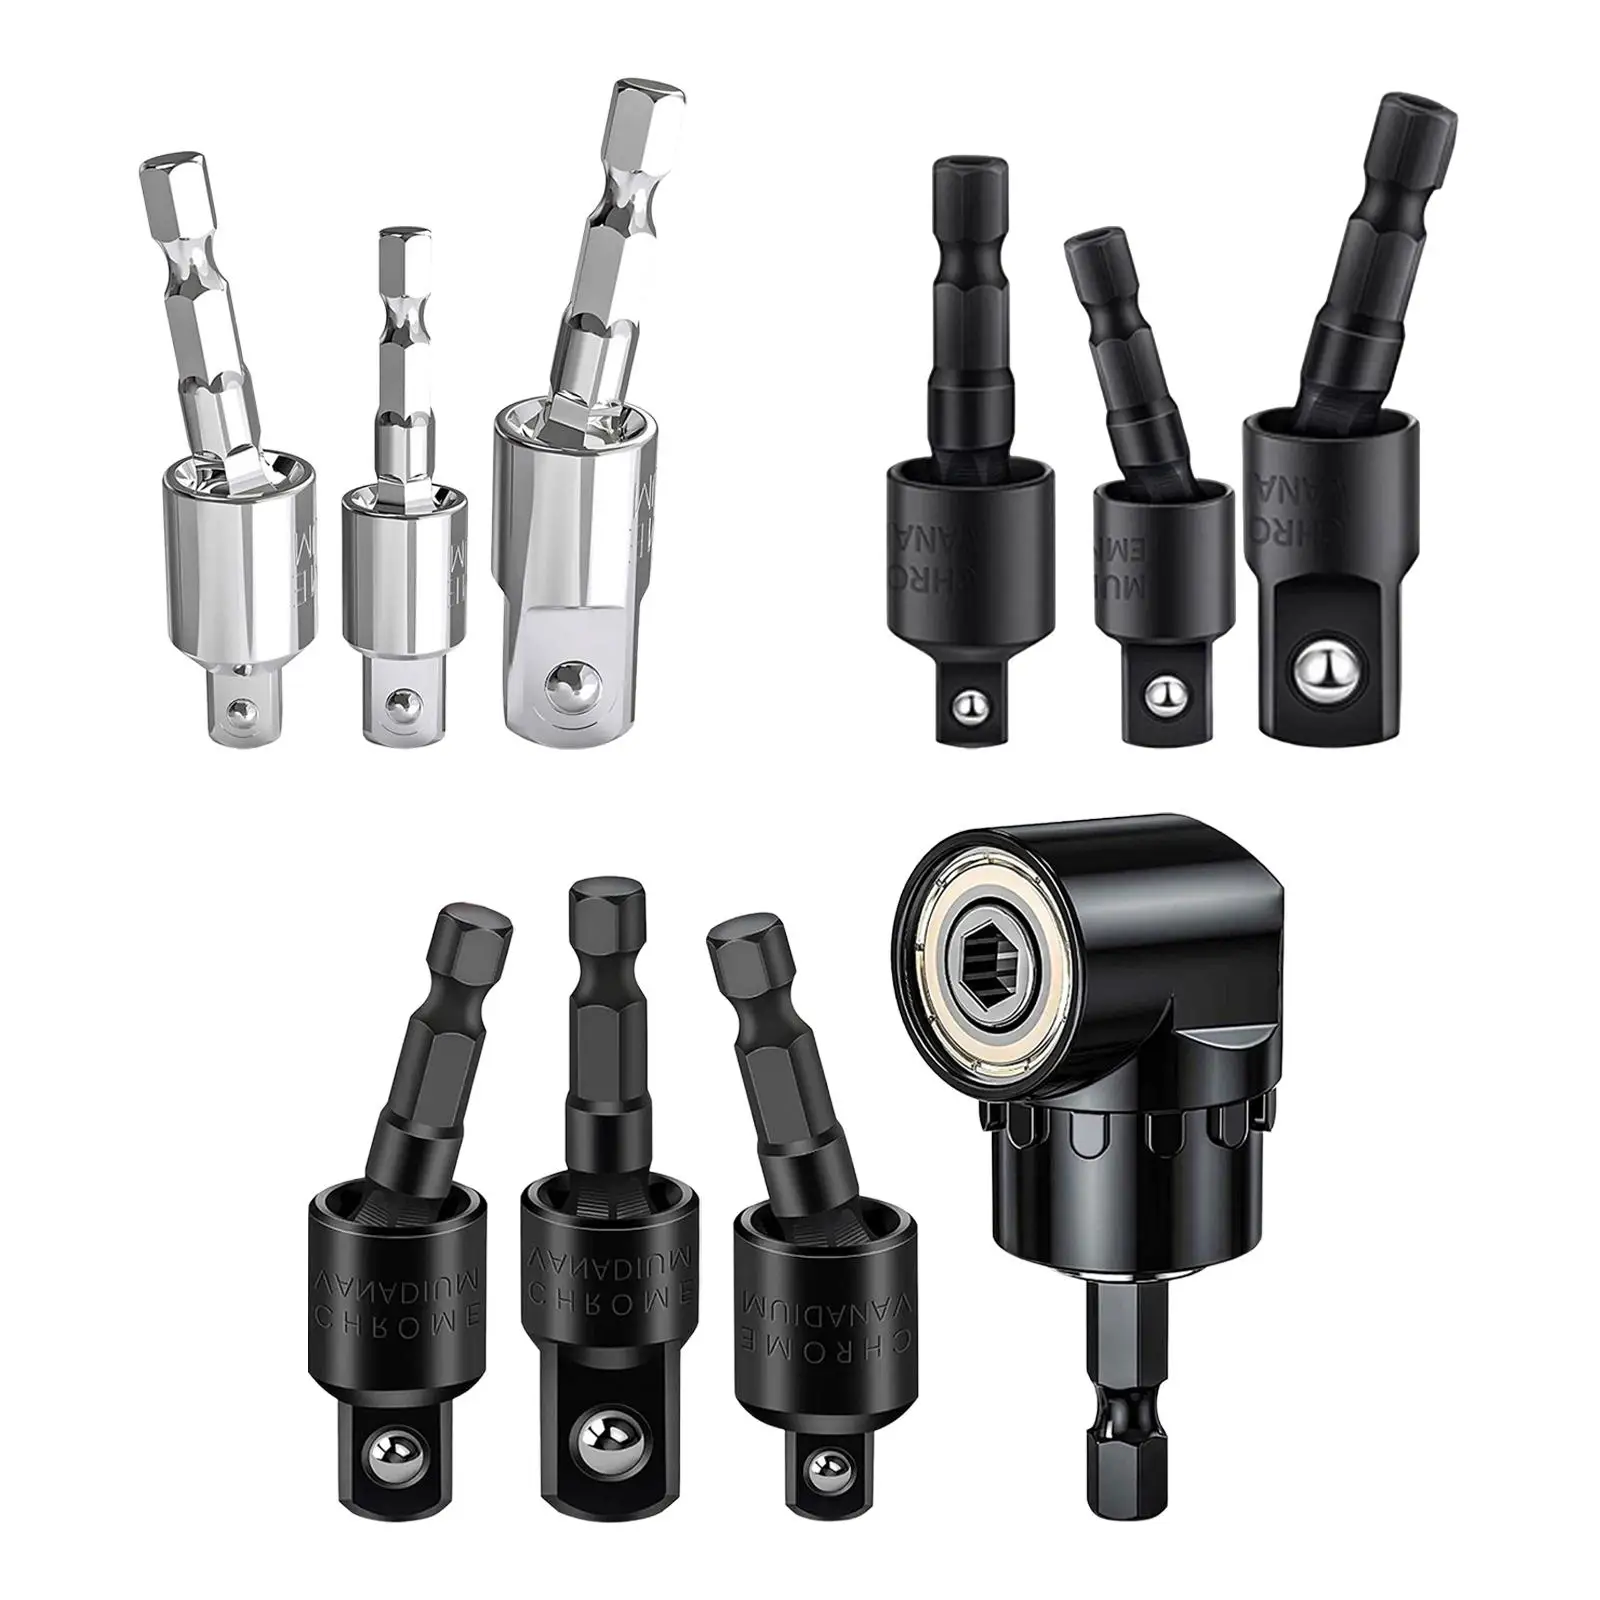 

3Pcs 1/4" 3/8" 1/2"Driver Sockets Adapter Extension Impact Drill Sockets Adapter Hex Shank to Square Socket Drives for Household